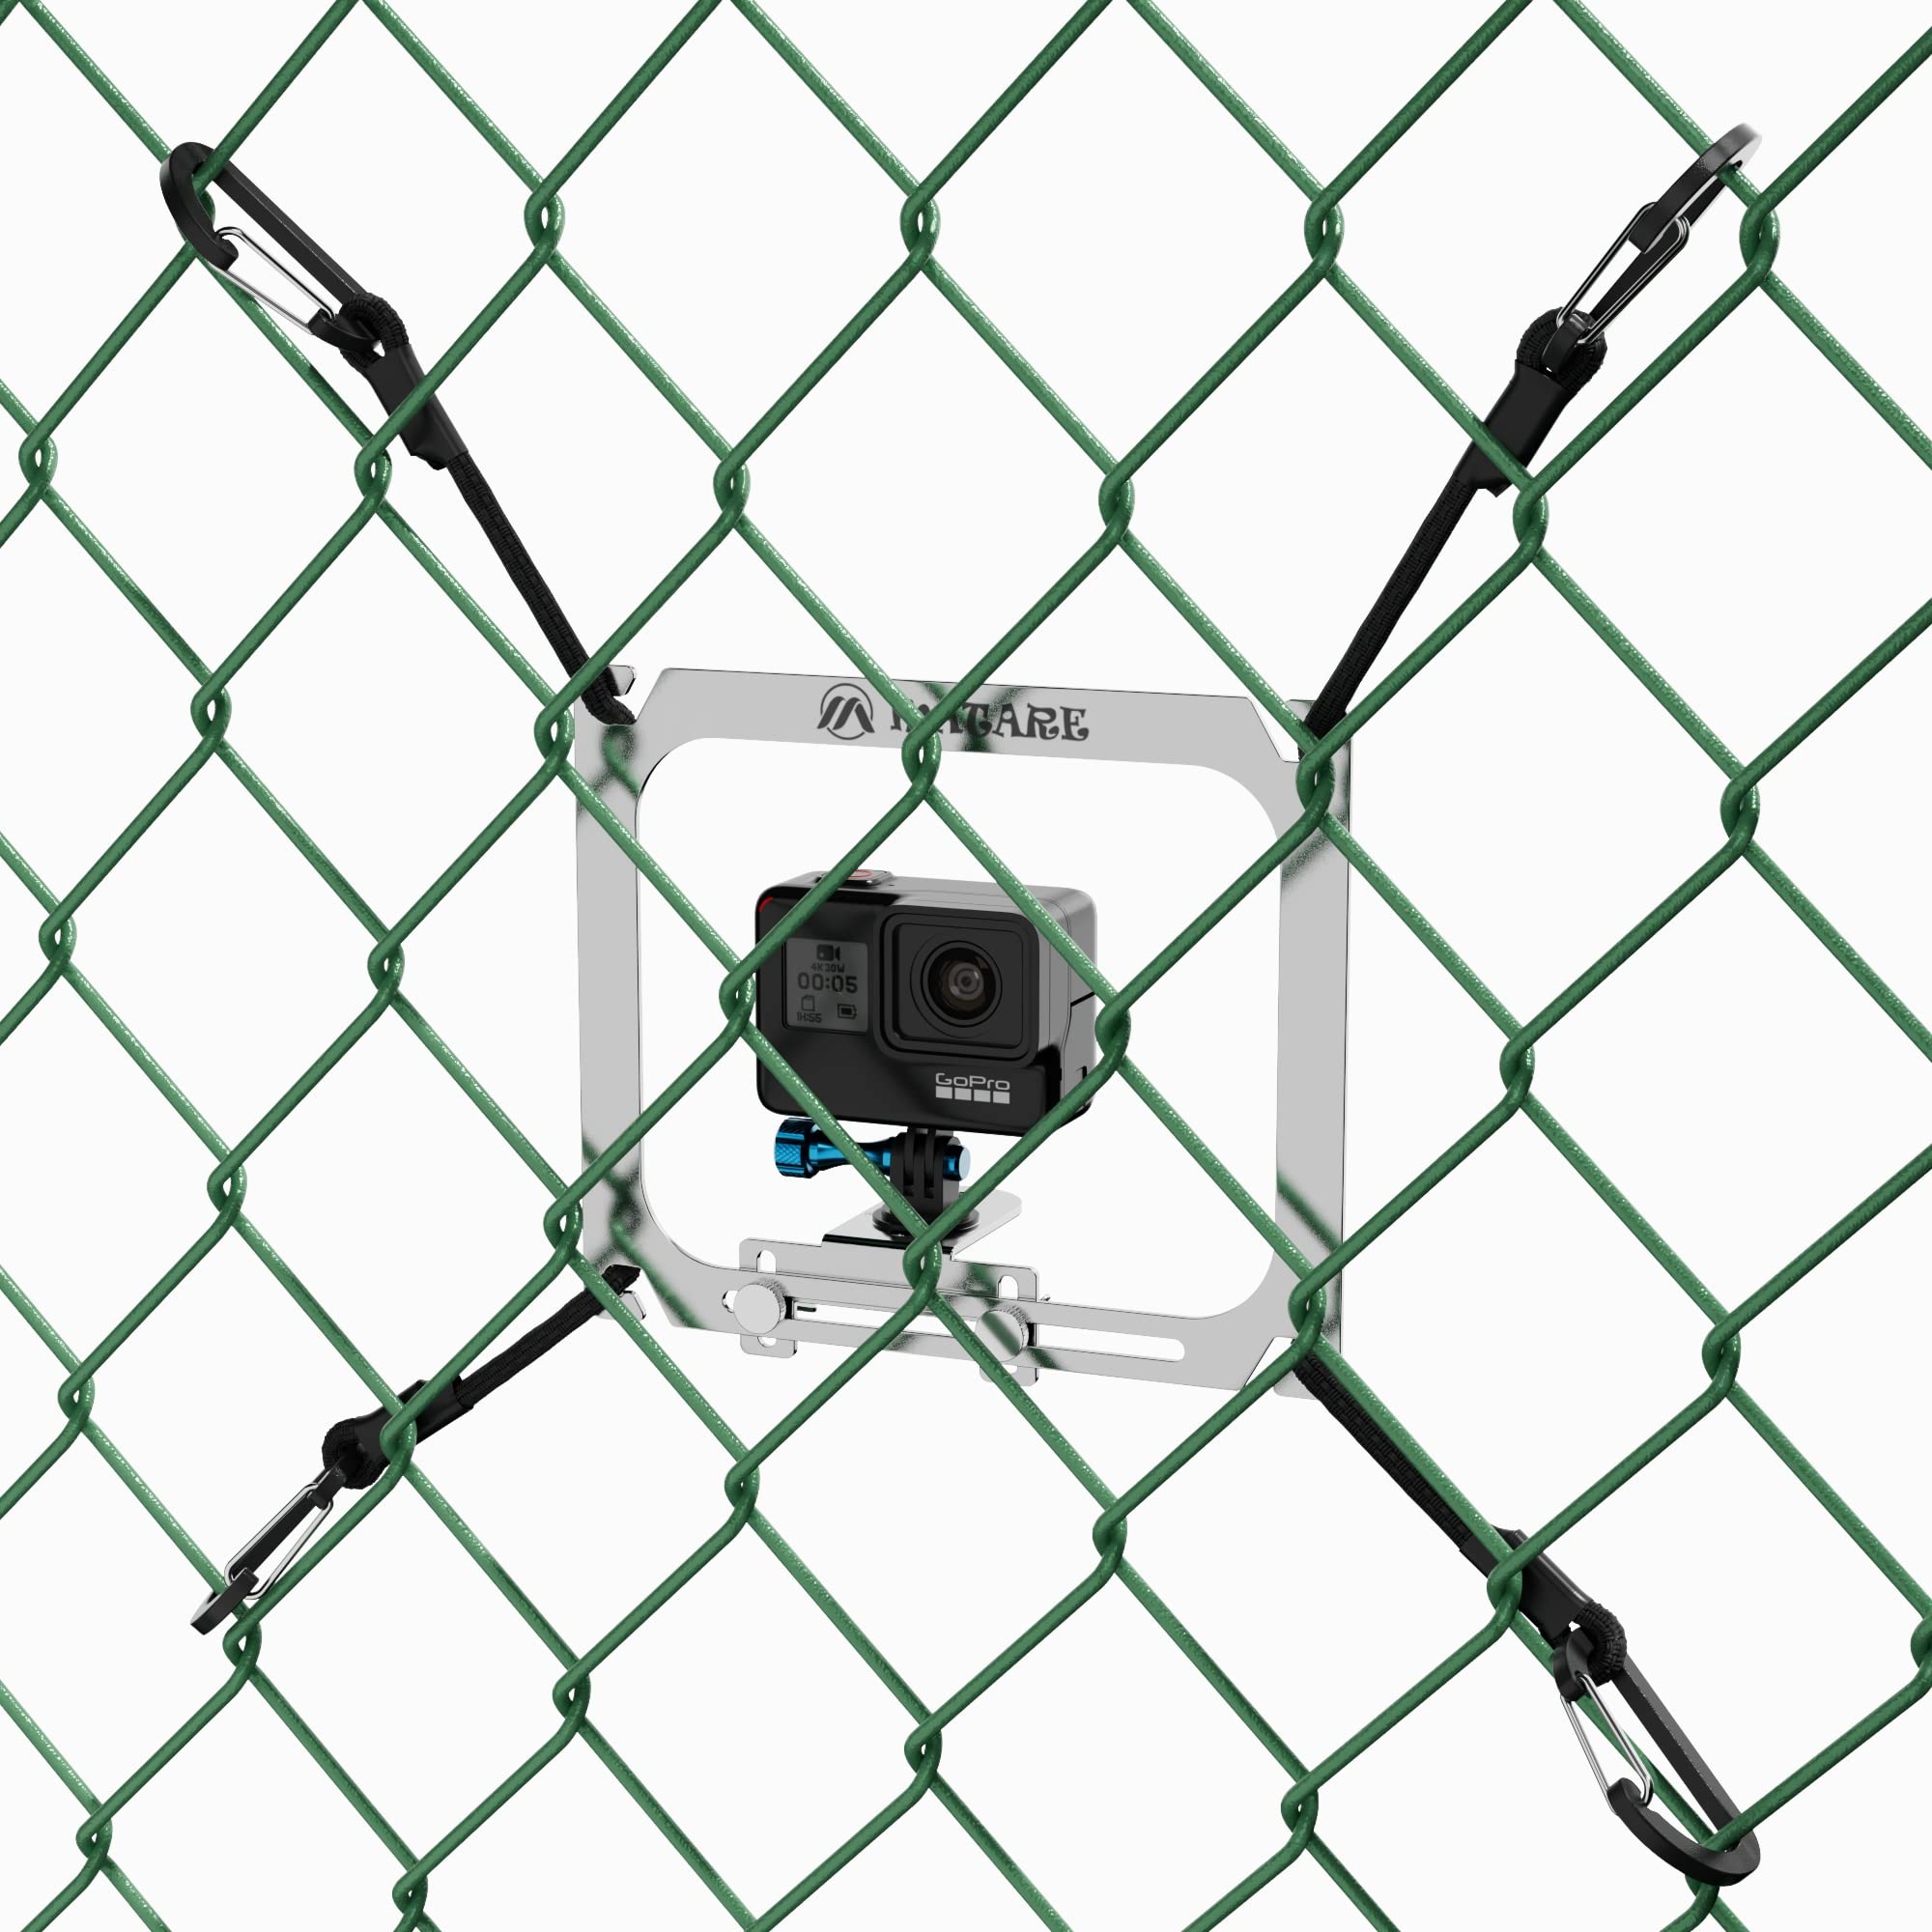 Cell Phone Fence Mount for iPhone, Mevo Start, Phones, GoPro and Other Action Cameras, to a Chain Link Fence for Recording Baseball,Softball and Tennis Games